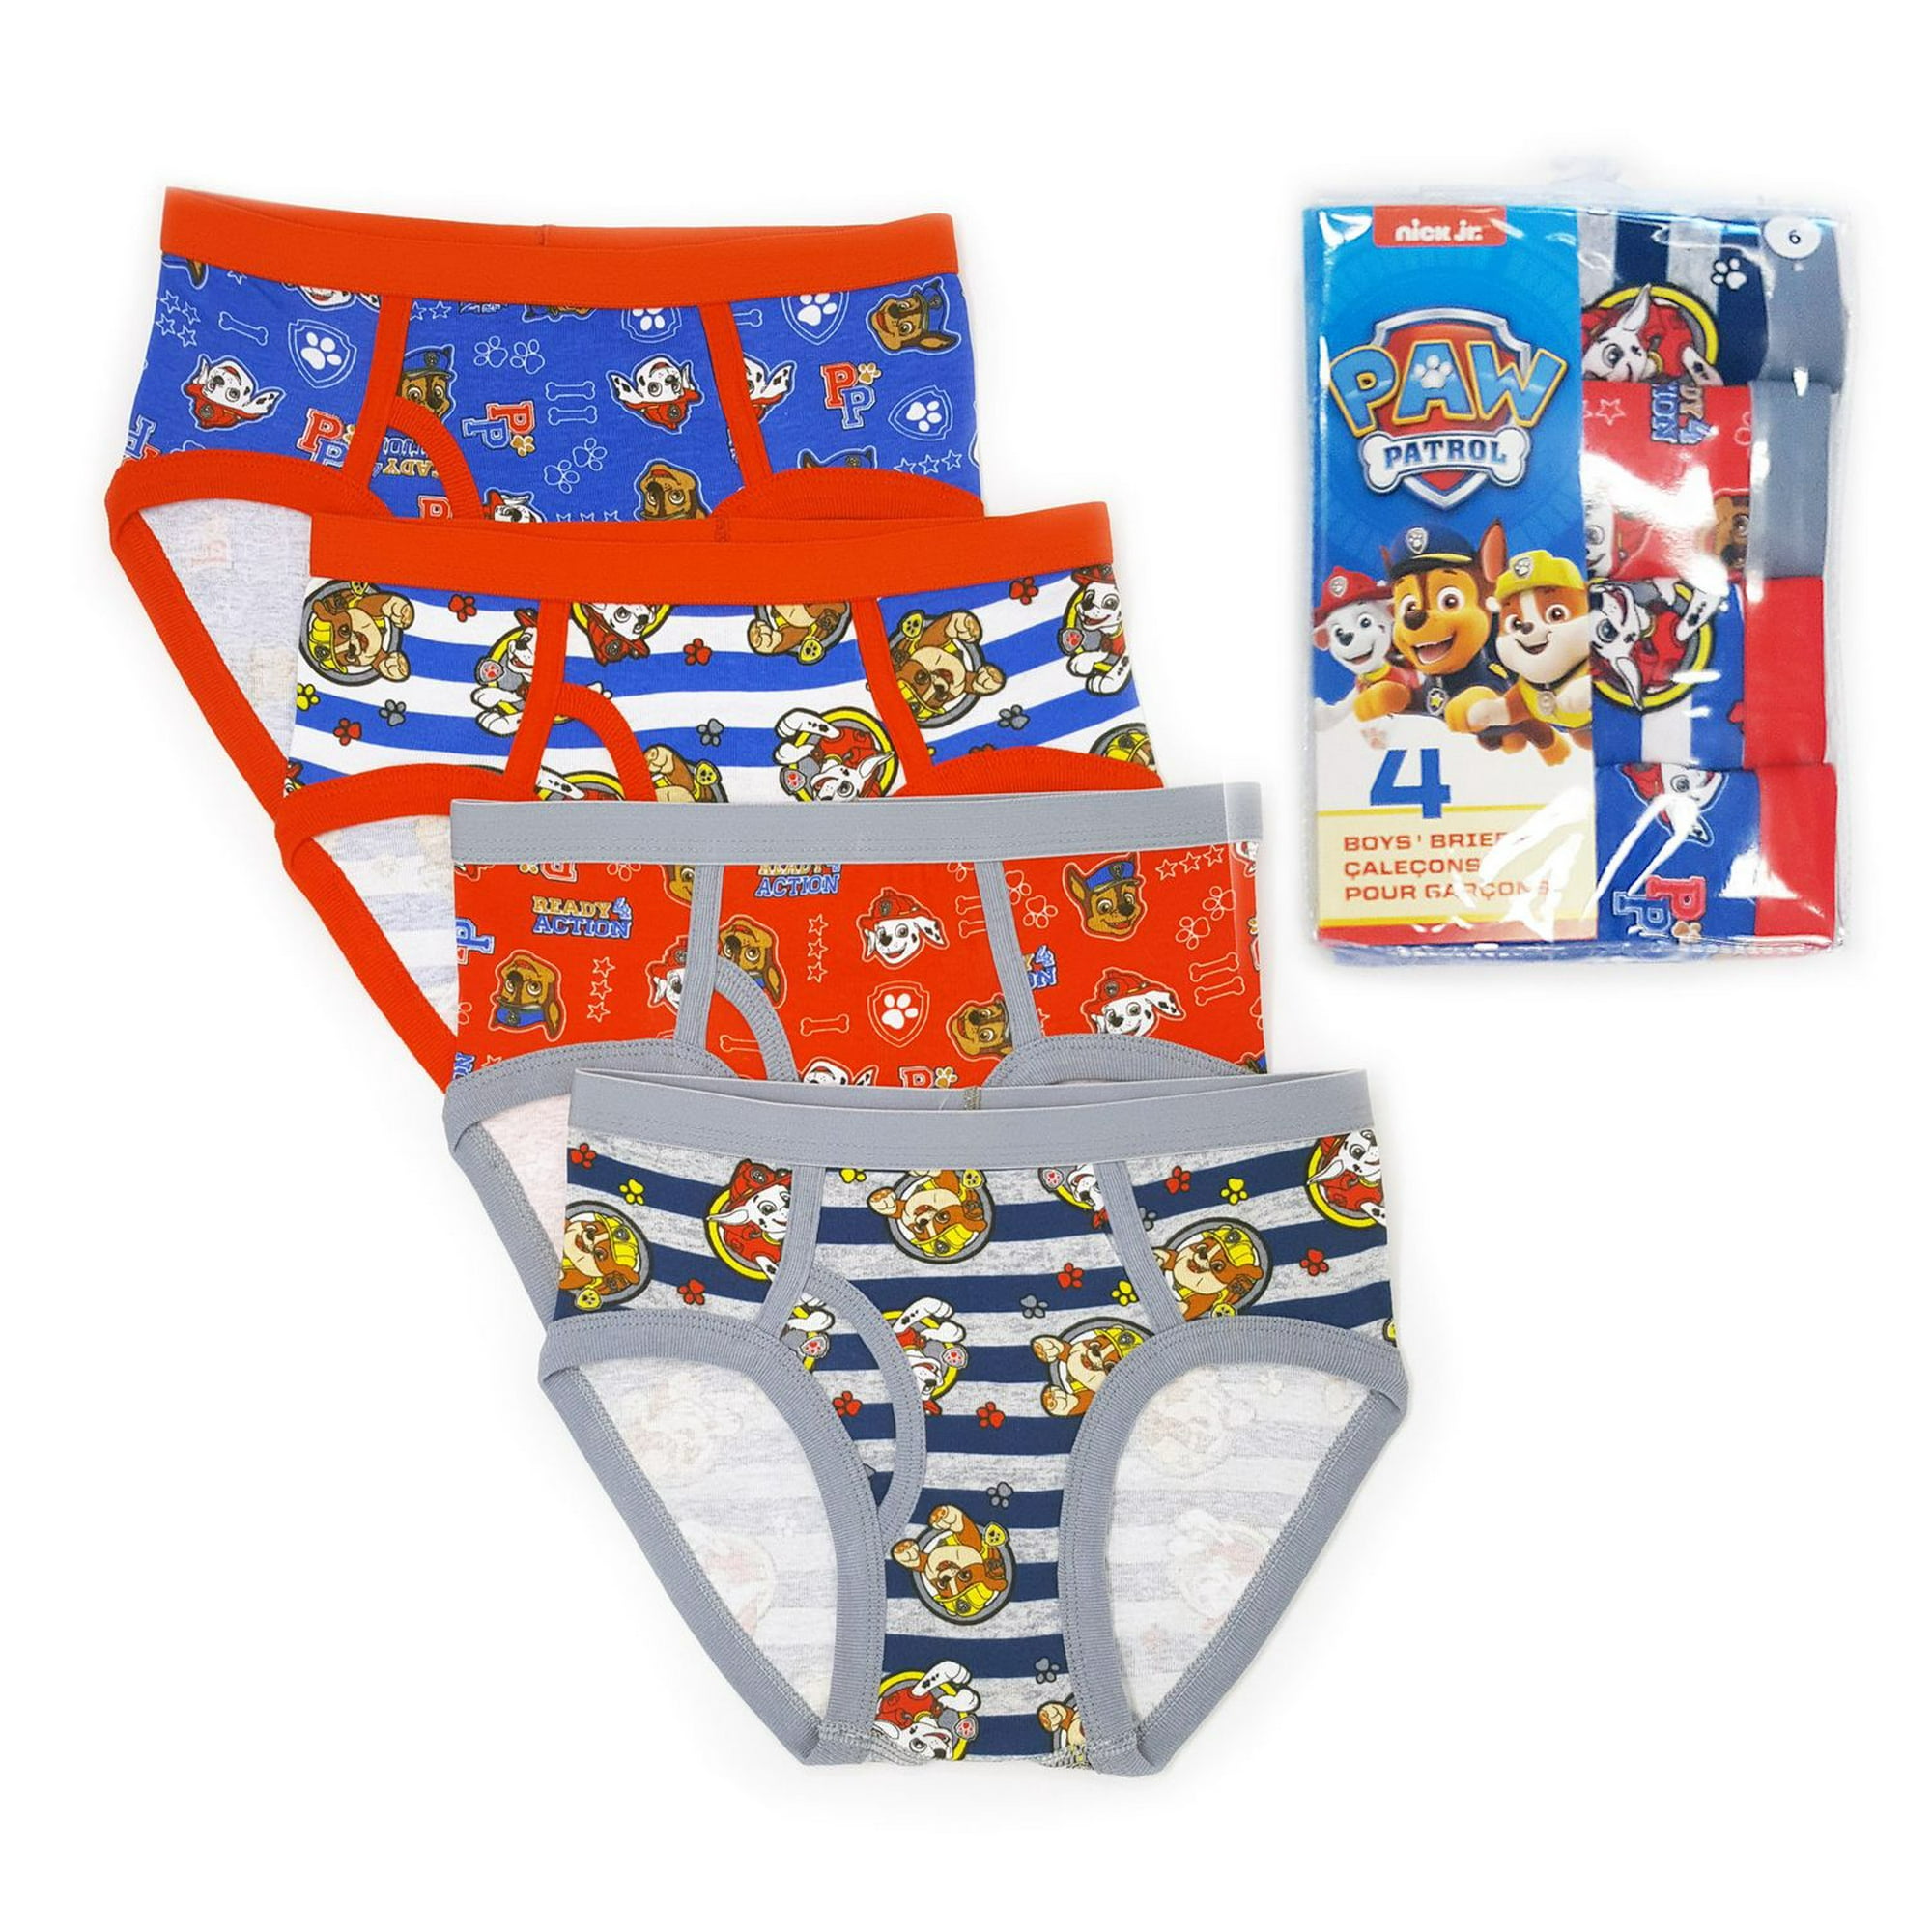 Paw Patrol Mighty Pups 4pk Youth Boys Boxer Briefs : Target